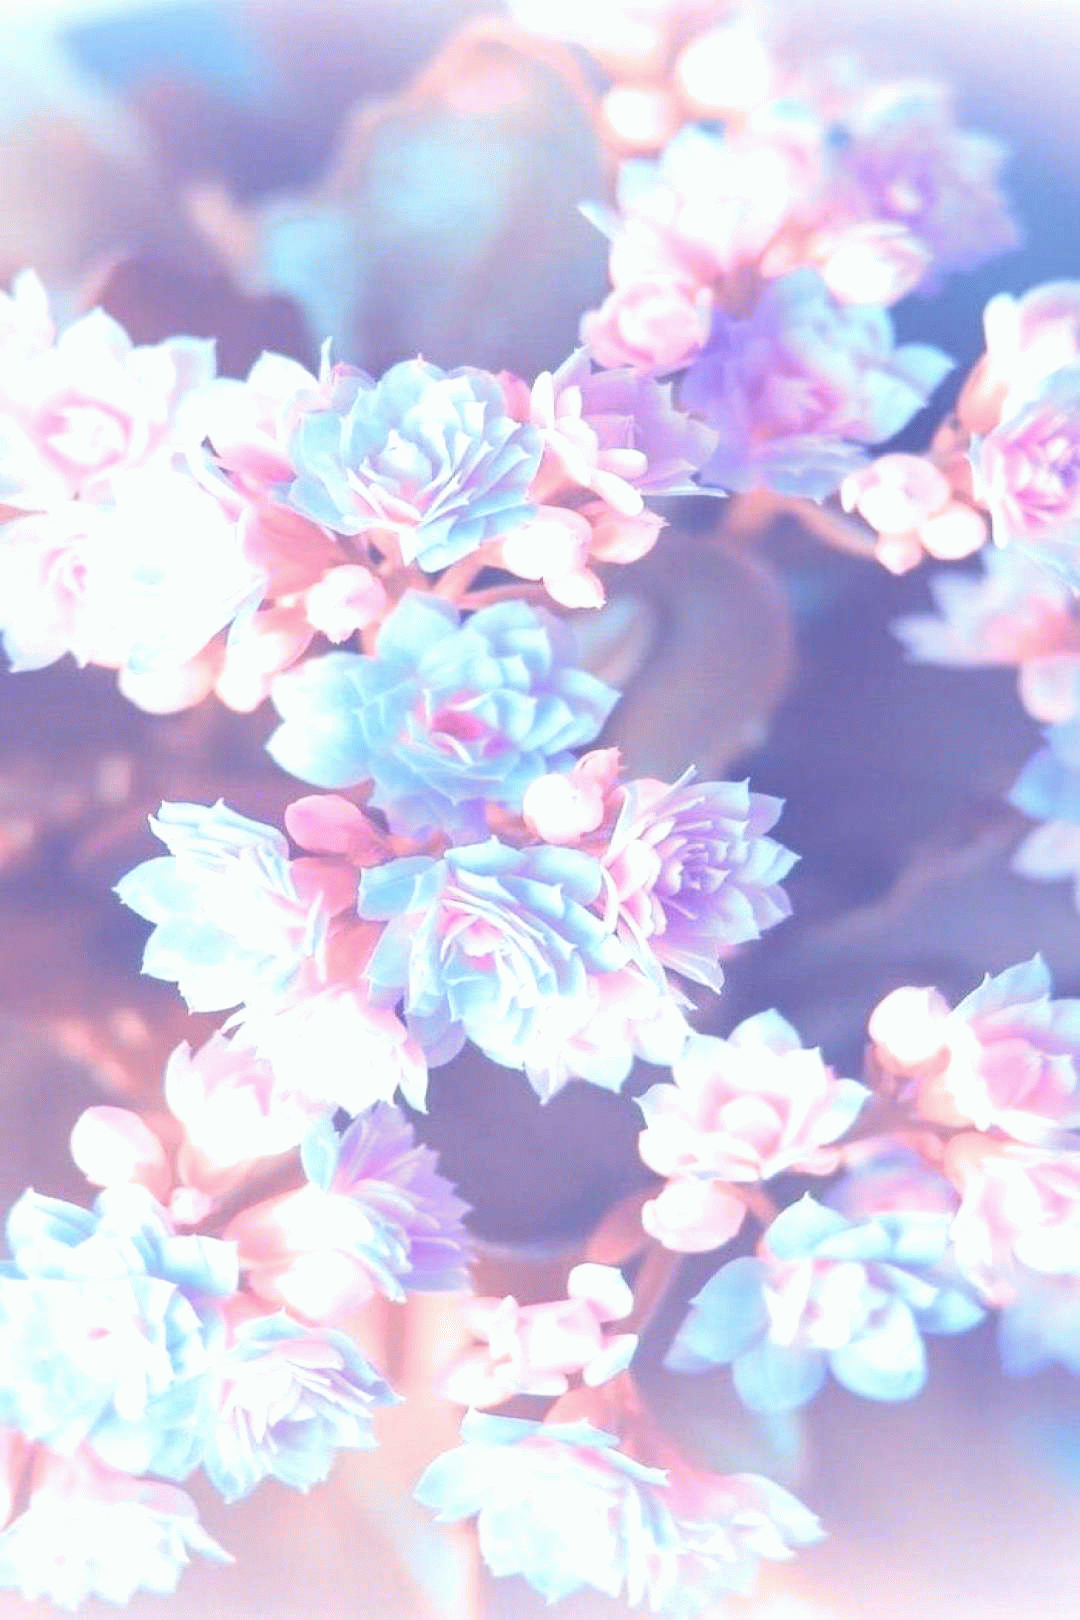 purple pink and blue flowers blurred background floral phone wallpaper happy spring images flower beautiful wallpapers small